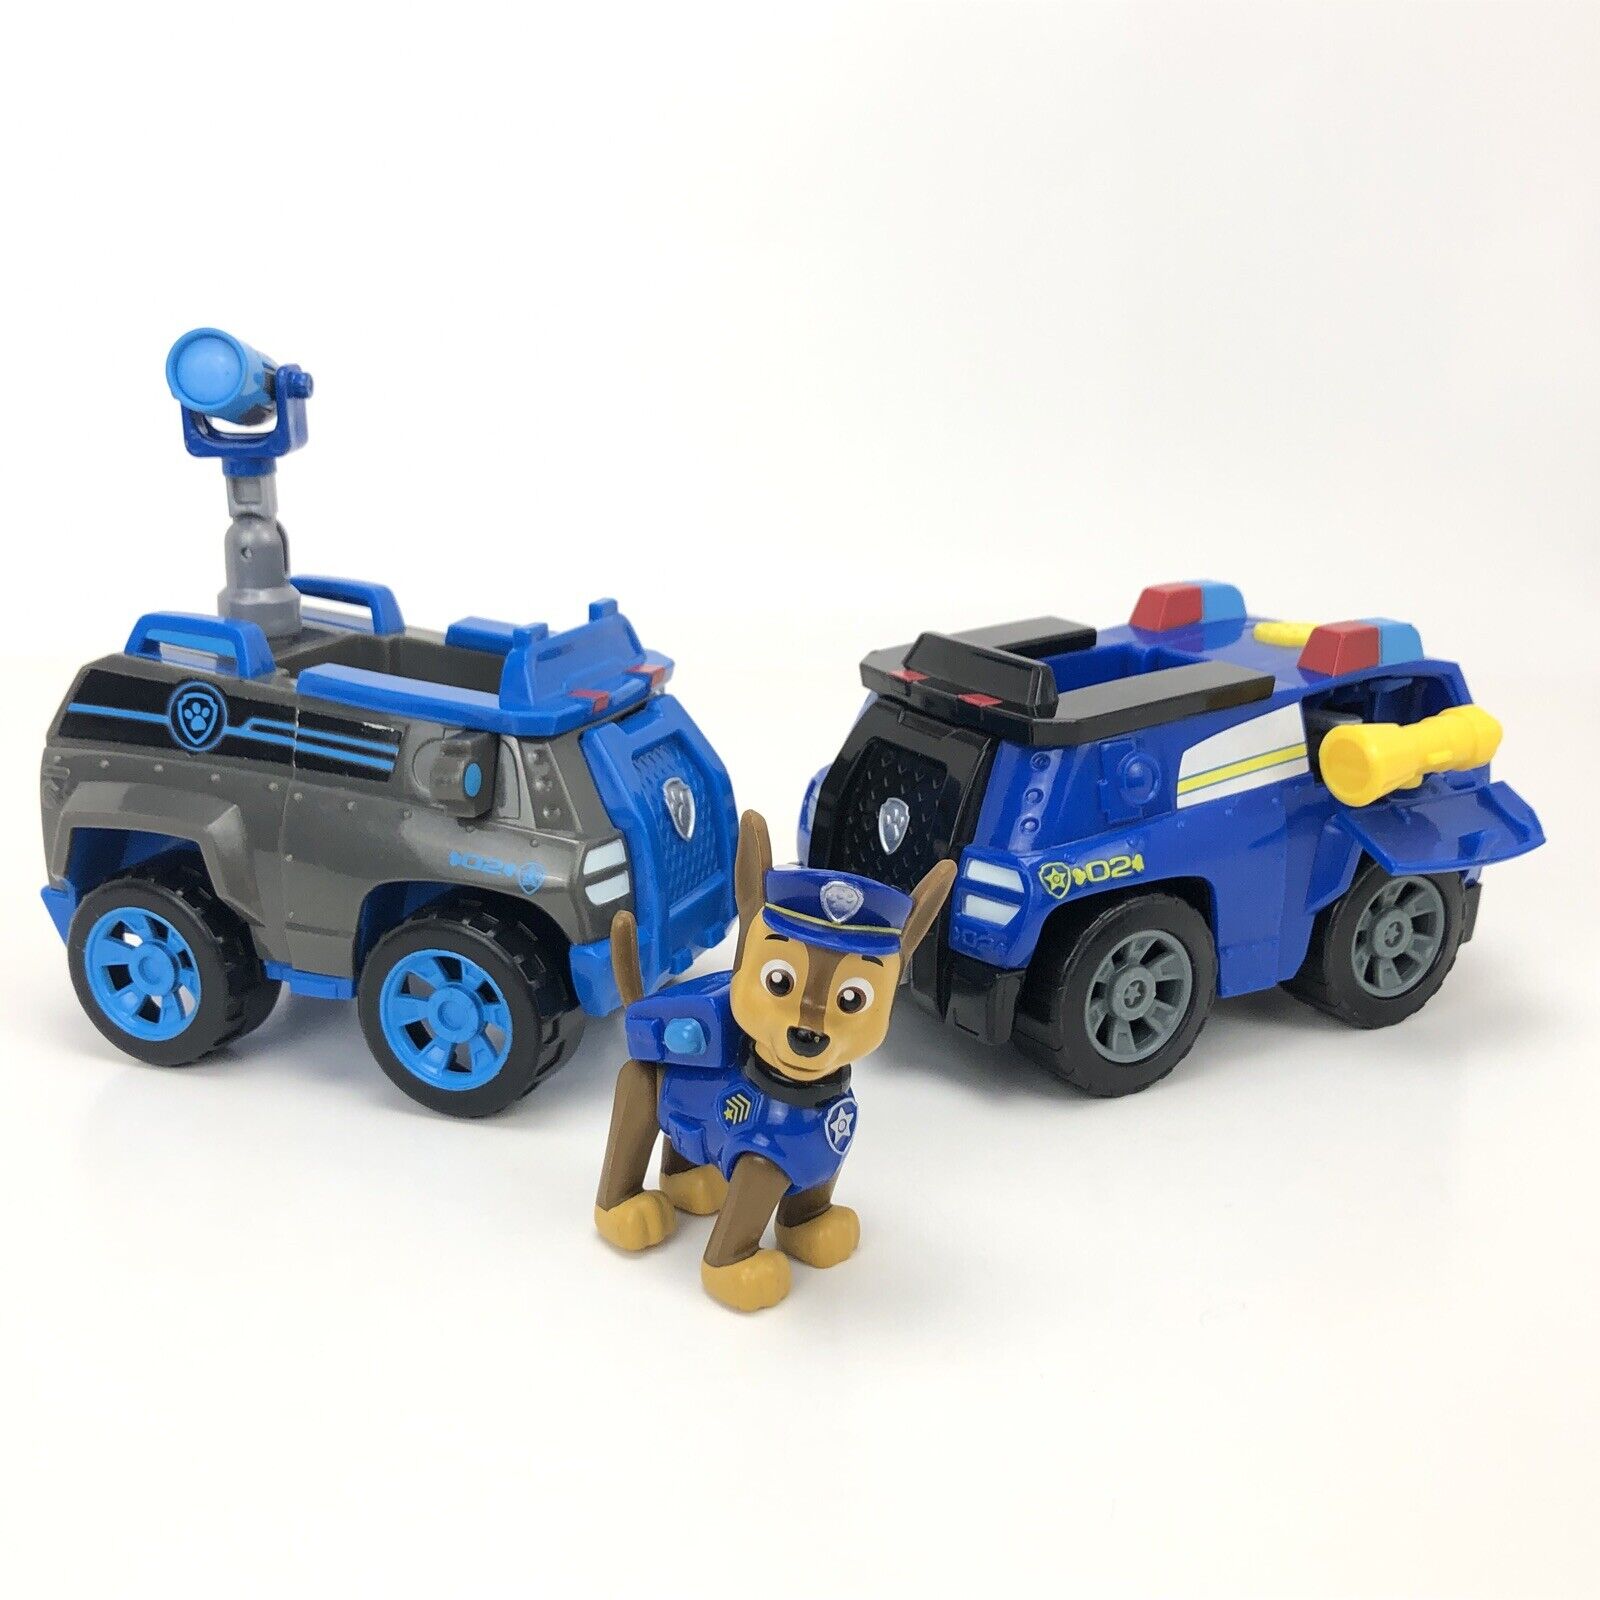 Paw Patrol Chase Mission Police Cruiser Figure with Vehicle & Transforming Truck